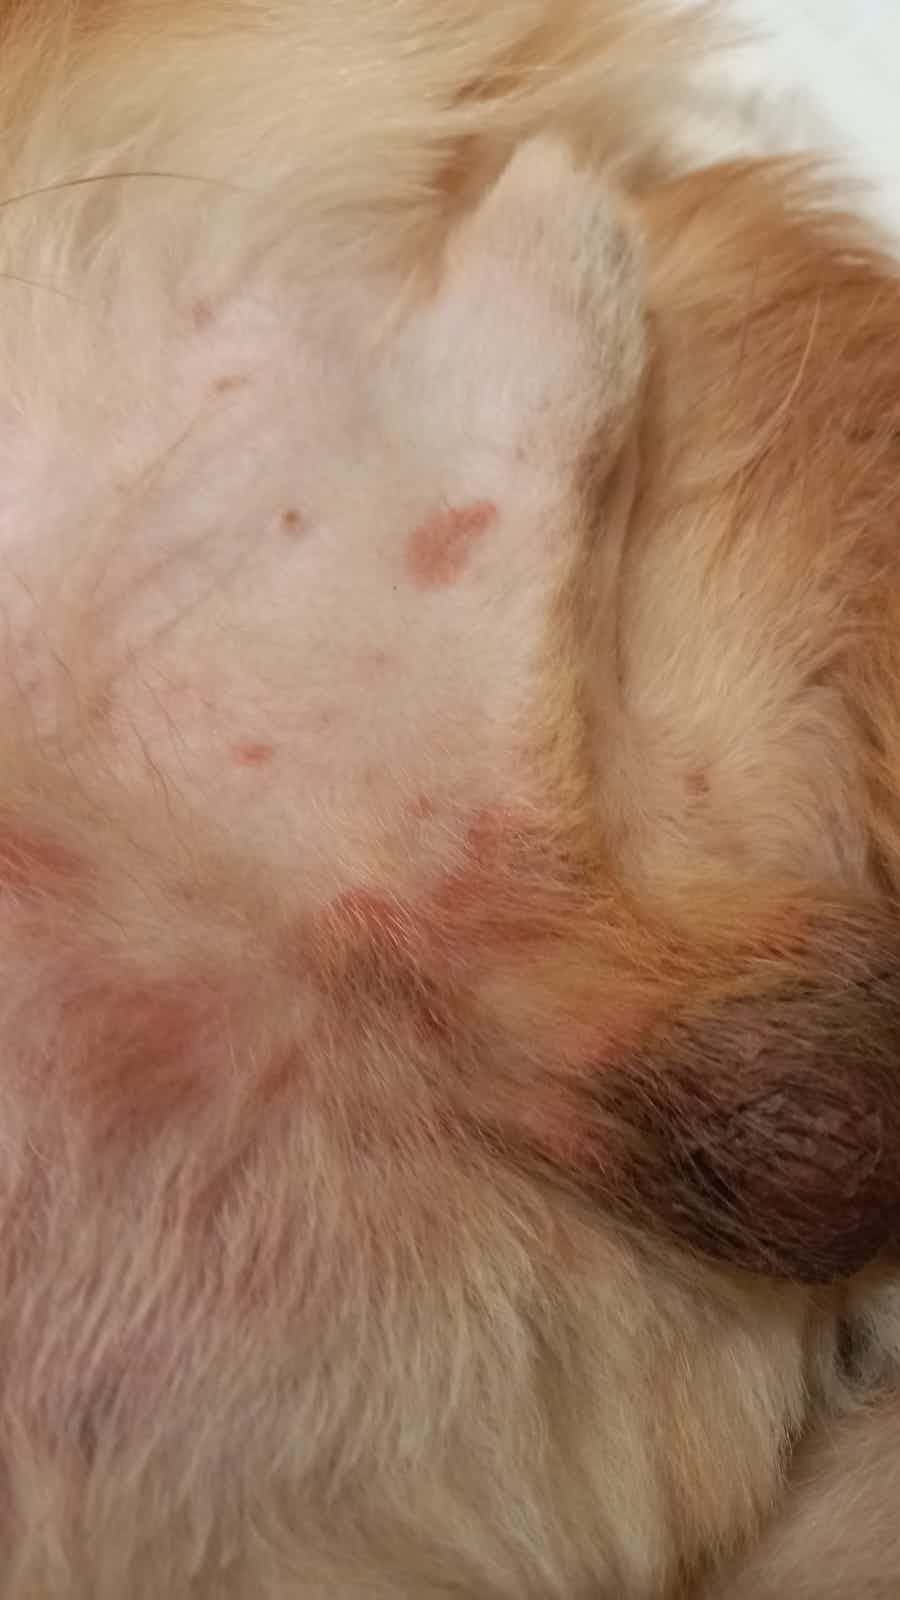 These red spots are coming from where he urinates. Is this bacterial infection?